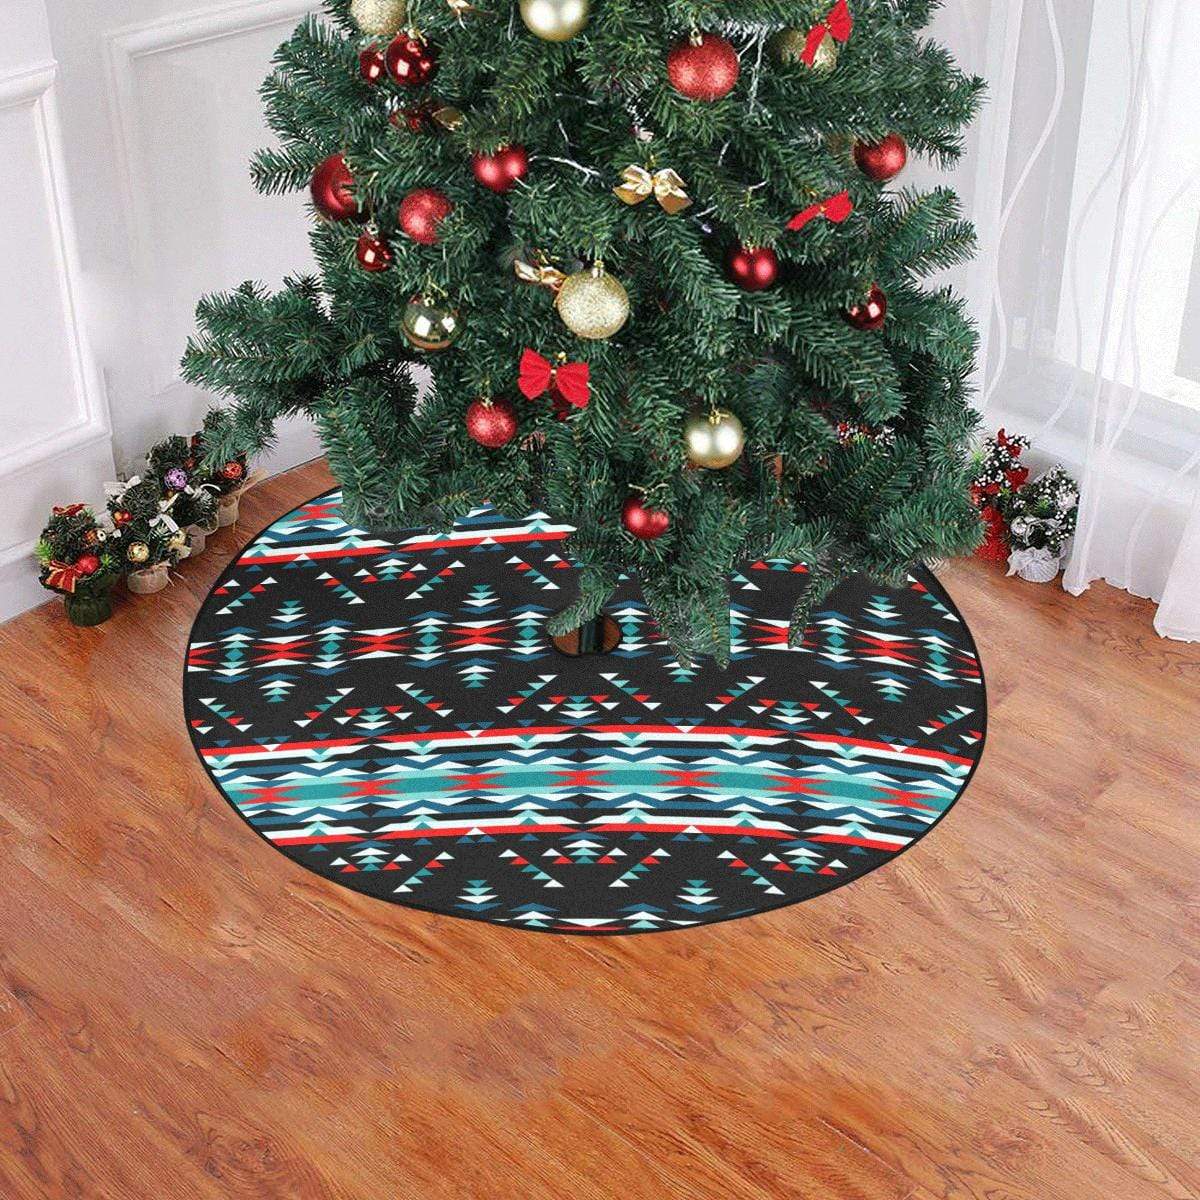 Visions of Peaceful Nights Christmas Tree Skirt 47" x 47" Christmas Tree Skirt e-joyer 